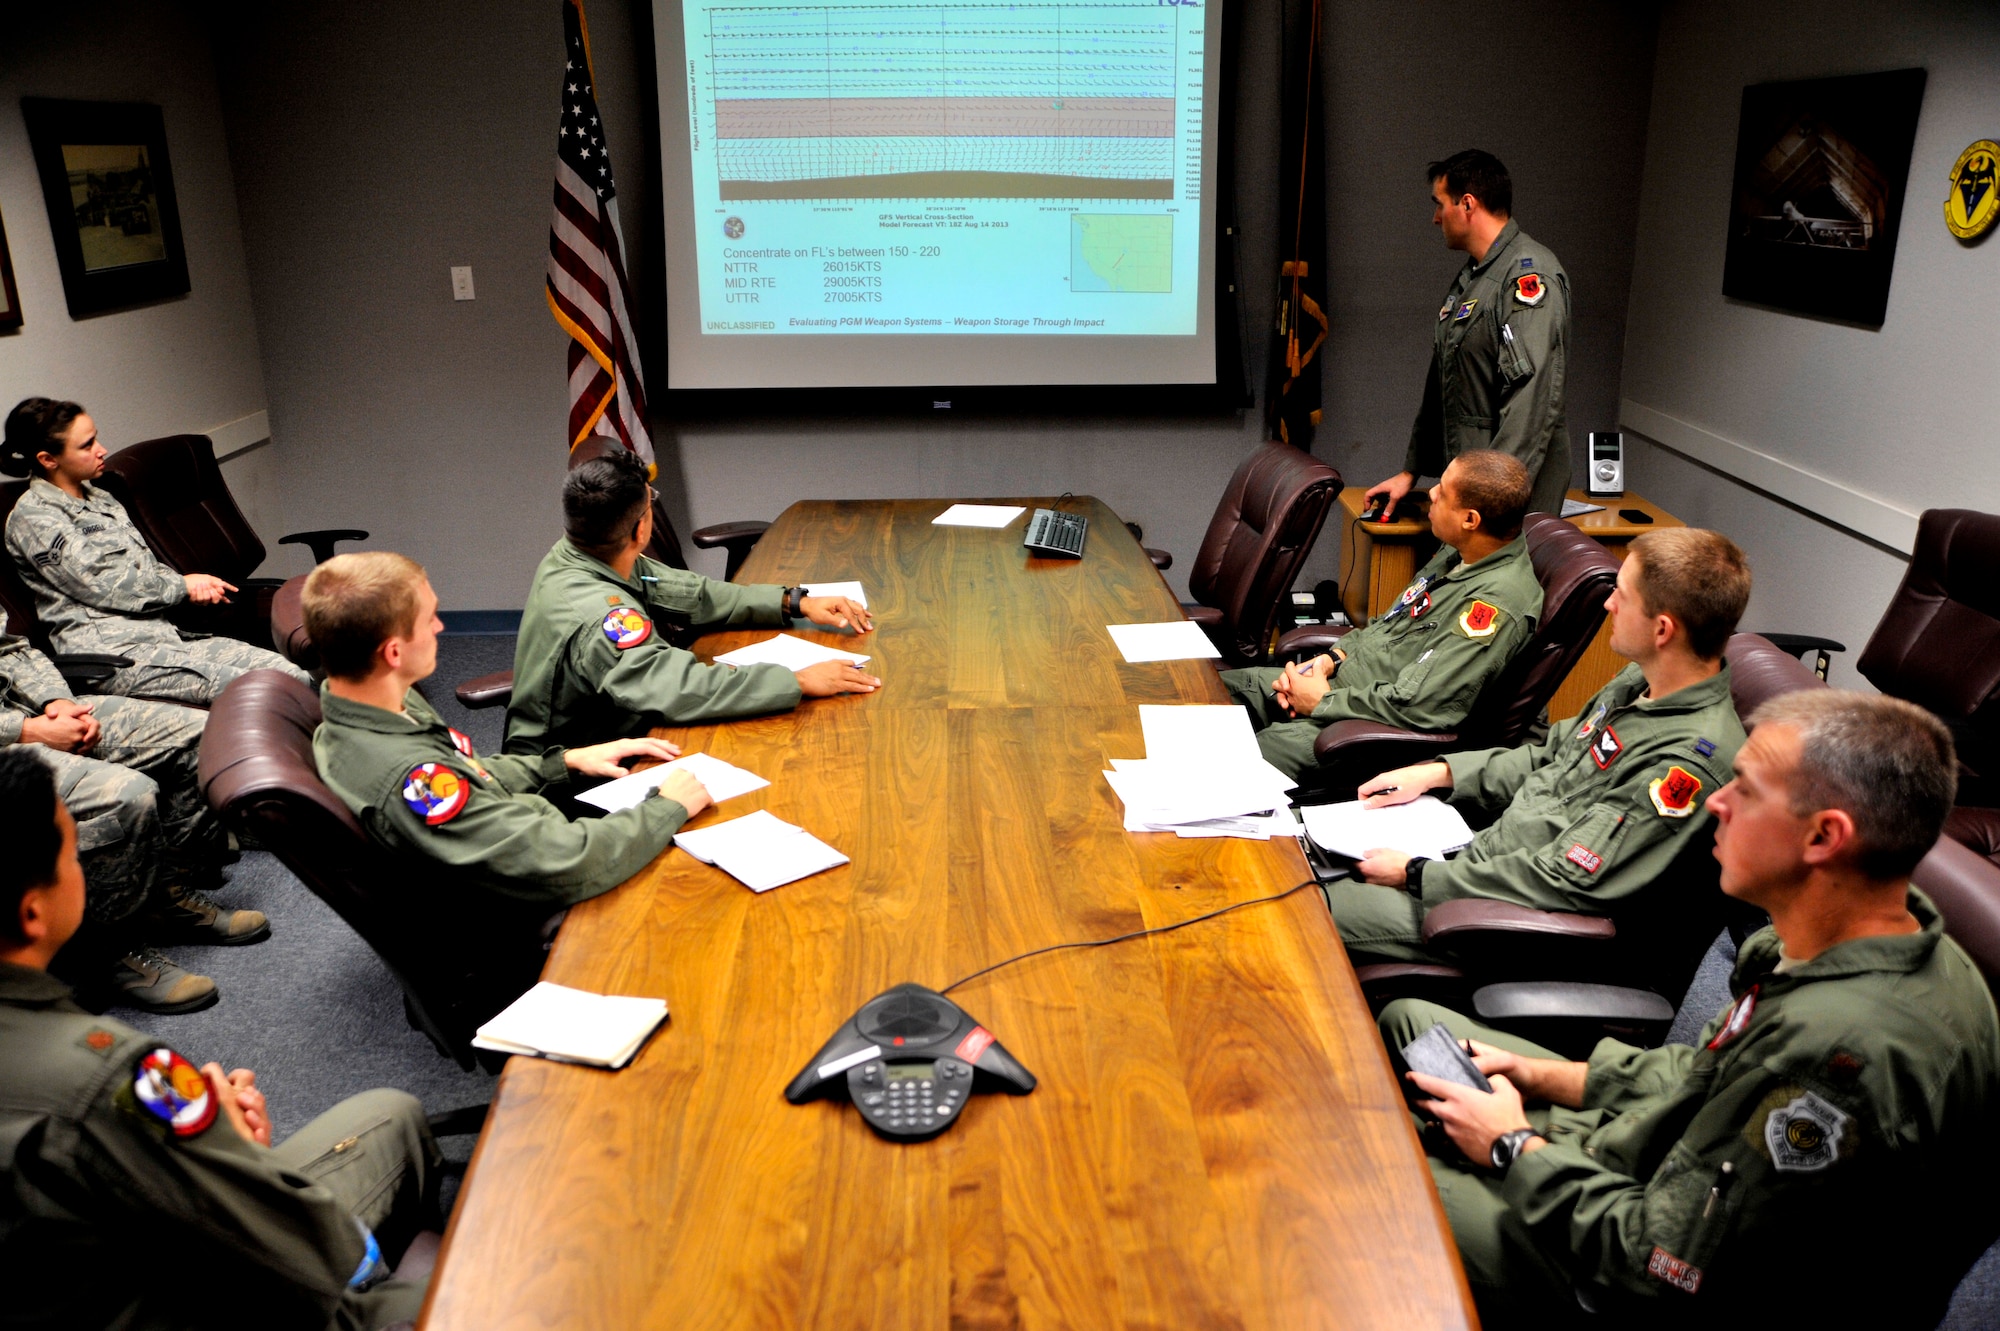 Members of the 11th Reconnaissance Squadron receive a pre-flight briefing from Capt. Marcus, 432nd Operations Support Squadron Weapon System Evaluation Program evaluator, May 12, 2014, Creech Air Force Base, Nev. The 11 RS flew the MQ-9 Reaper in a week-long mission, known as Combat Hammer, where they released the GBU-12 Paveway II and AGM-114 Hellfire munitions. (U.S. Air Force photo by Airman 1st Class C.C./Released)